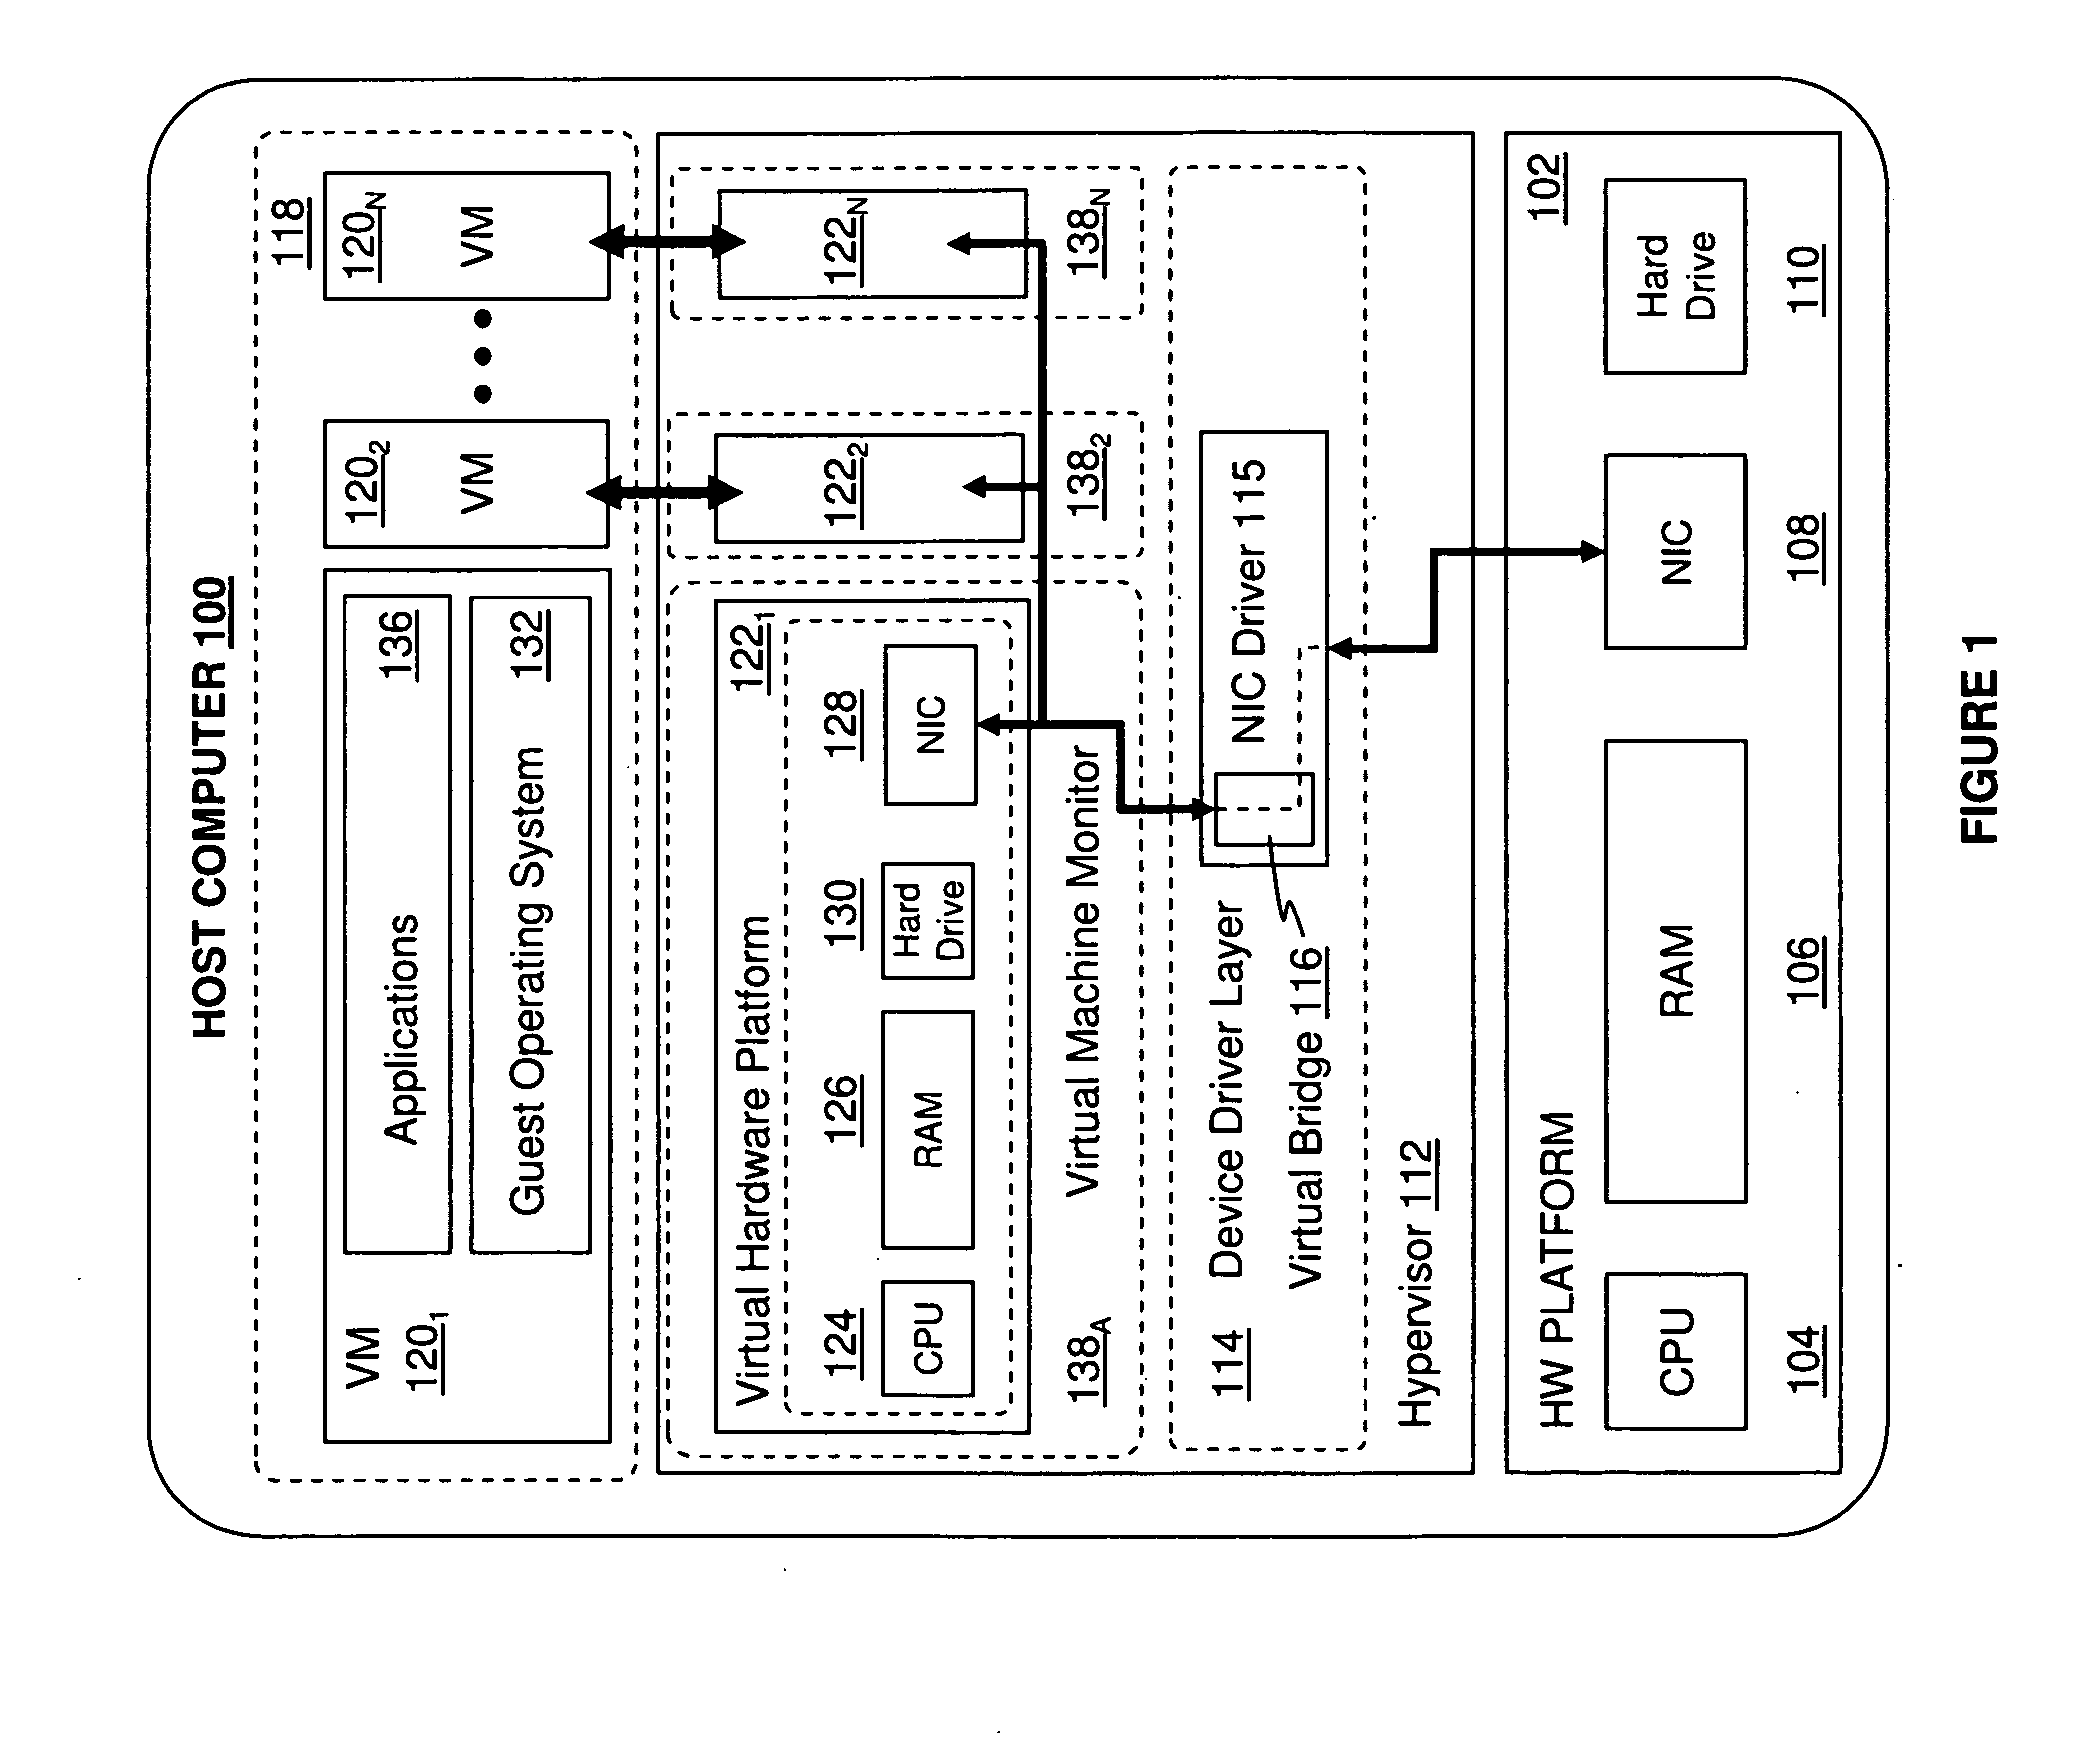 Method and System for Migrating Processes Between Virtual Machines